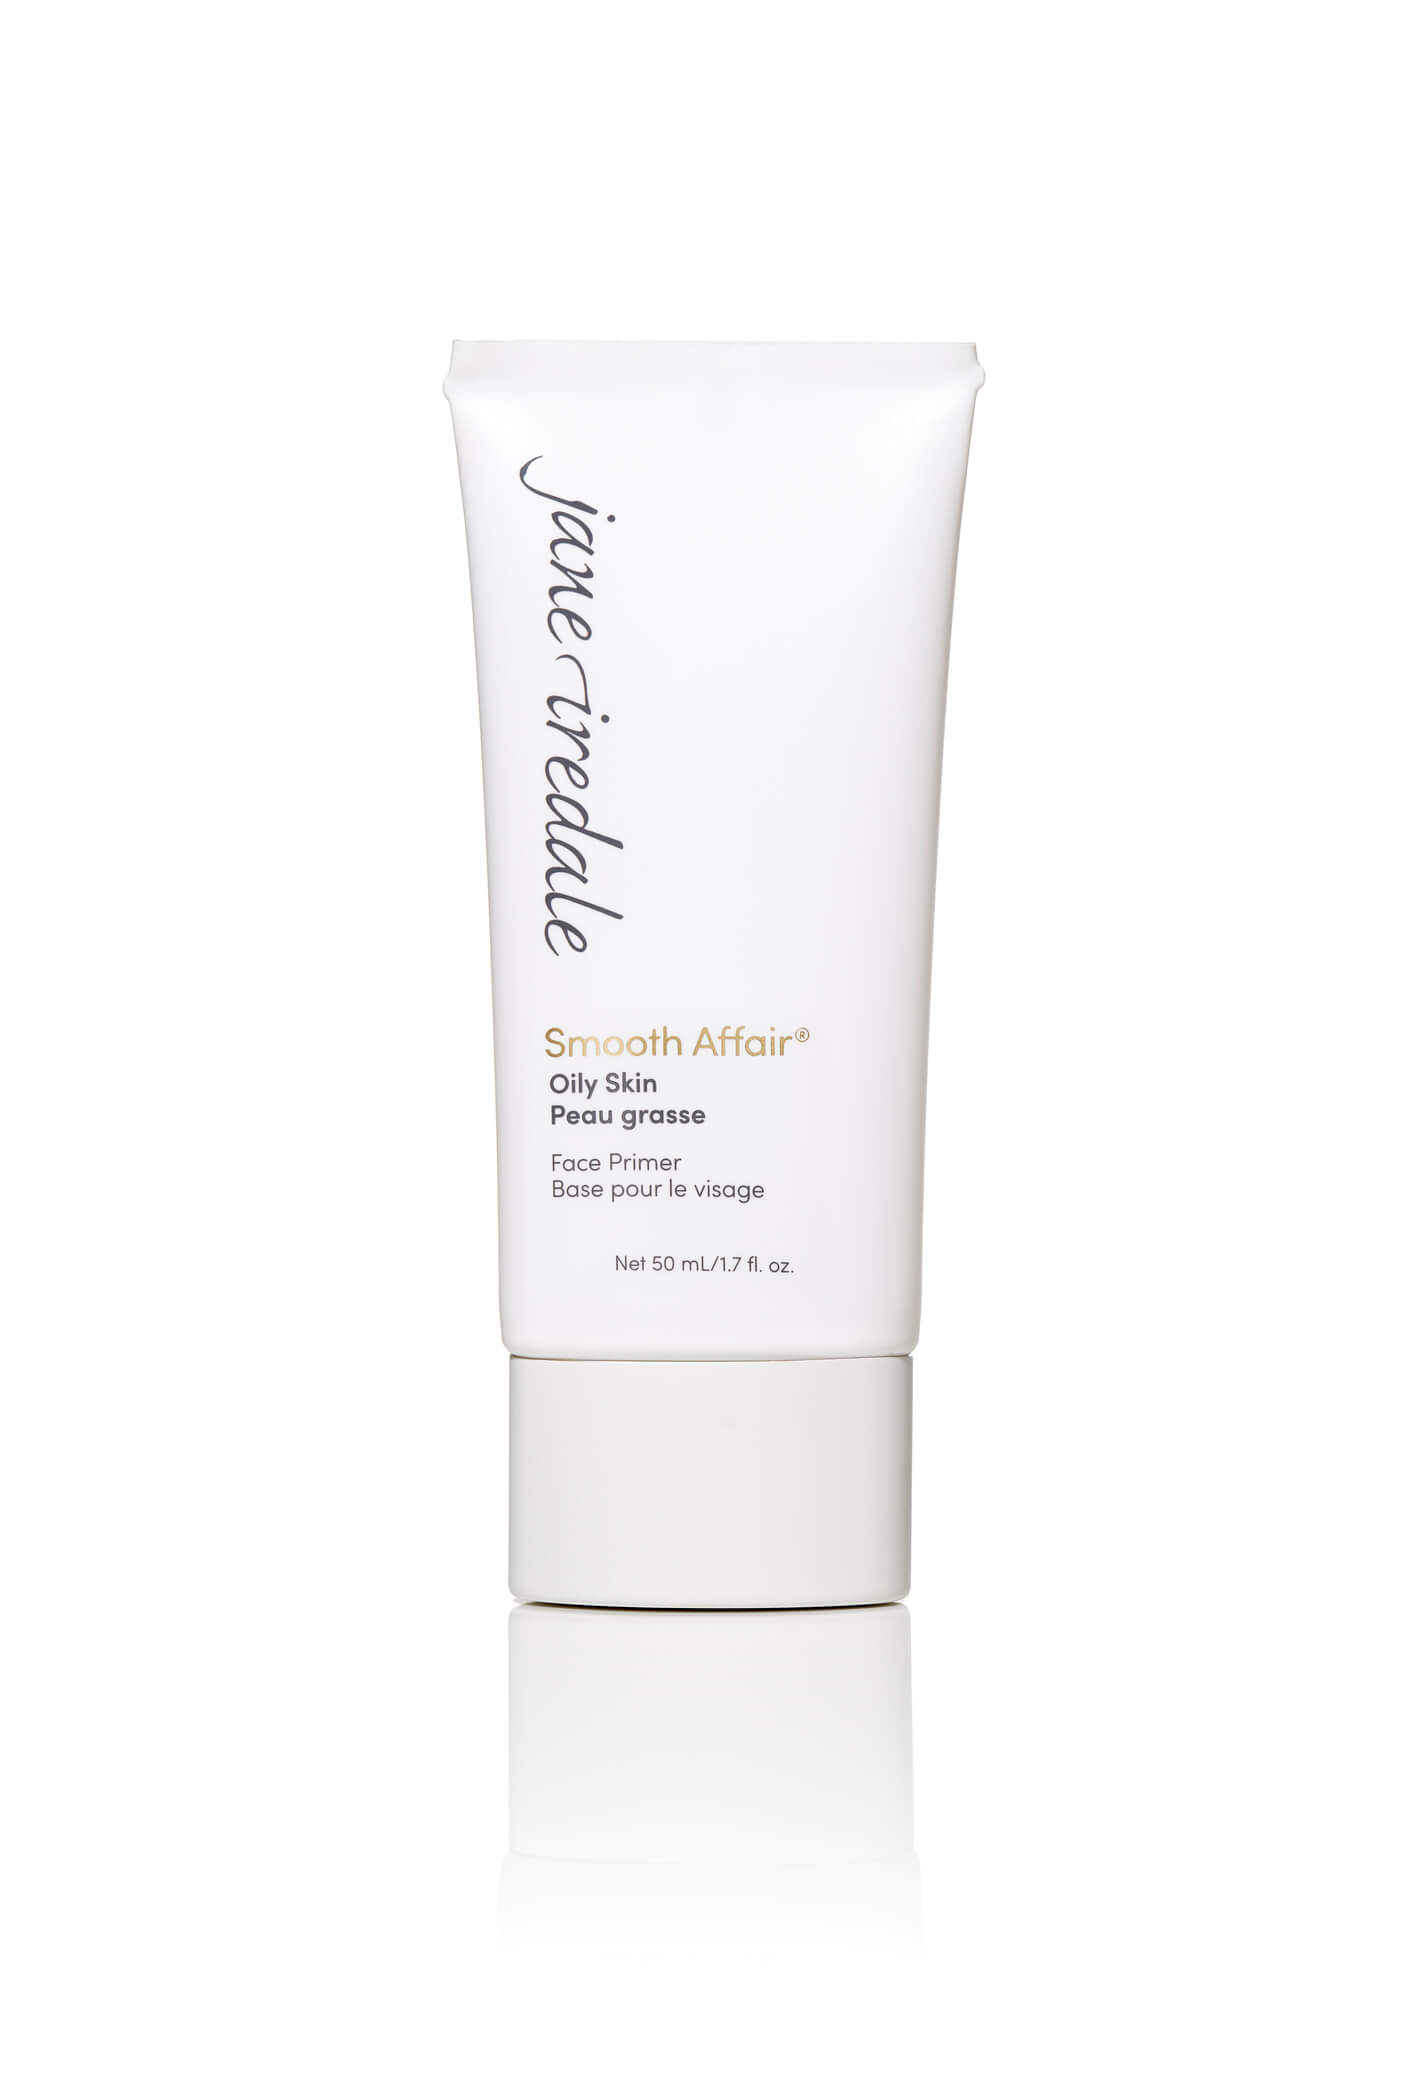 Smooth Affair for Oily Skin - Jane Iredale